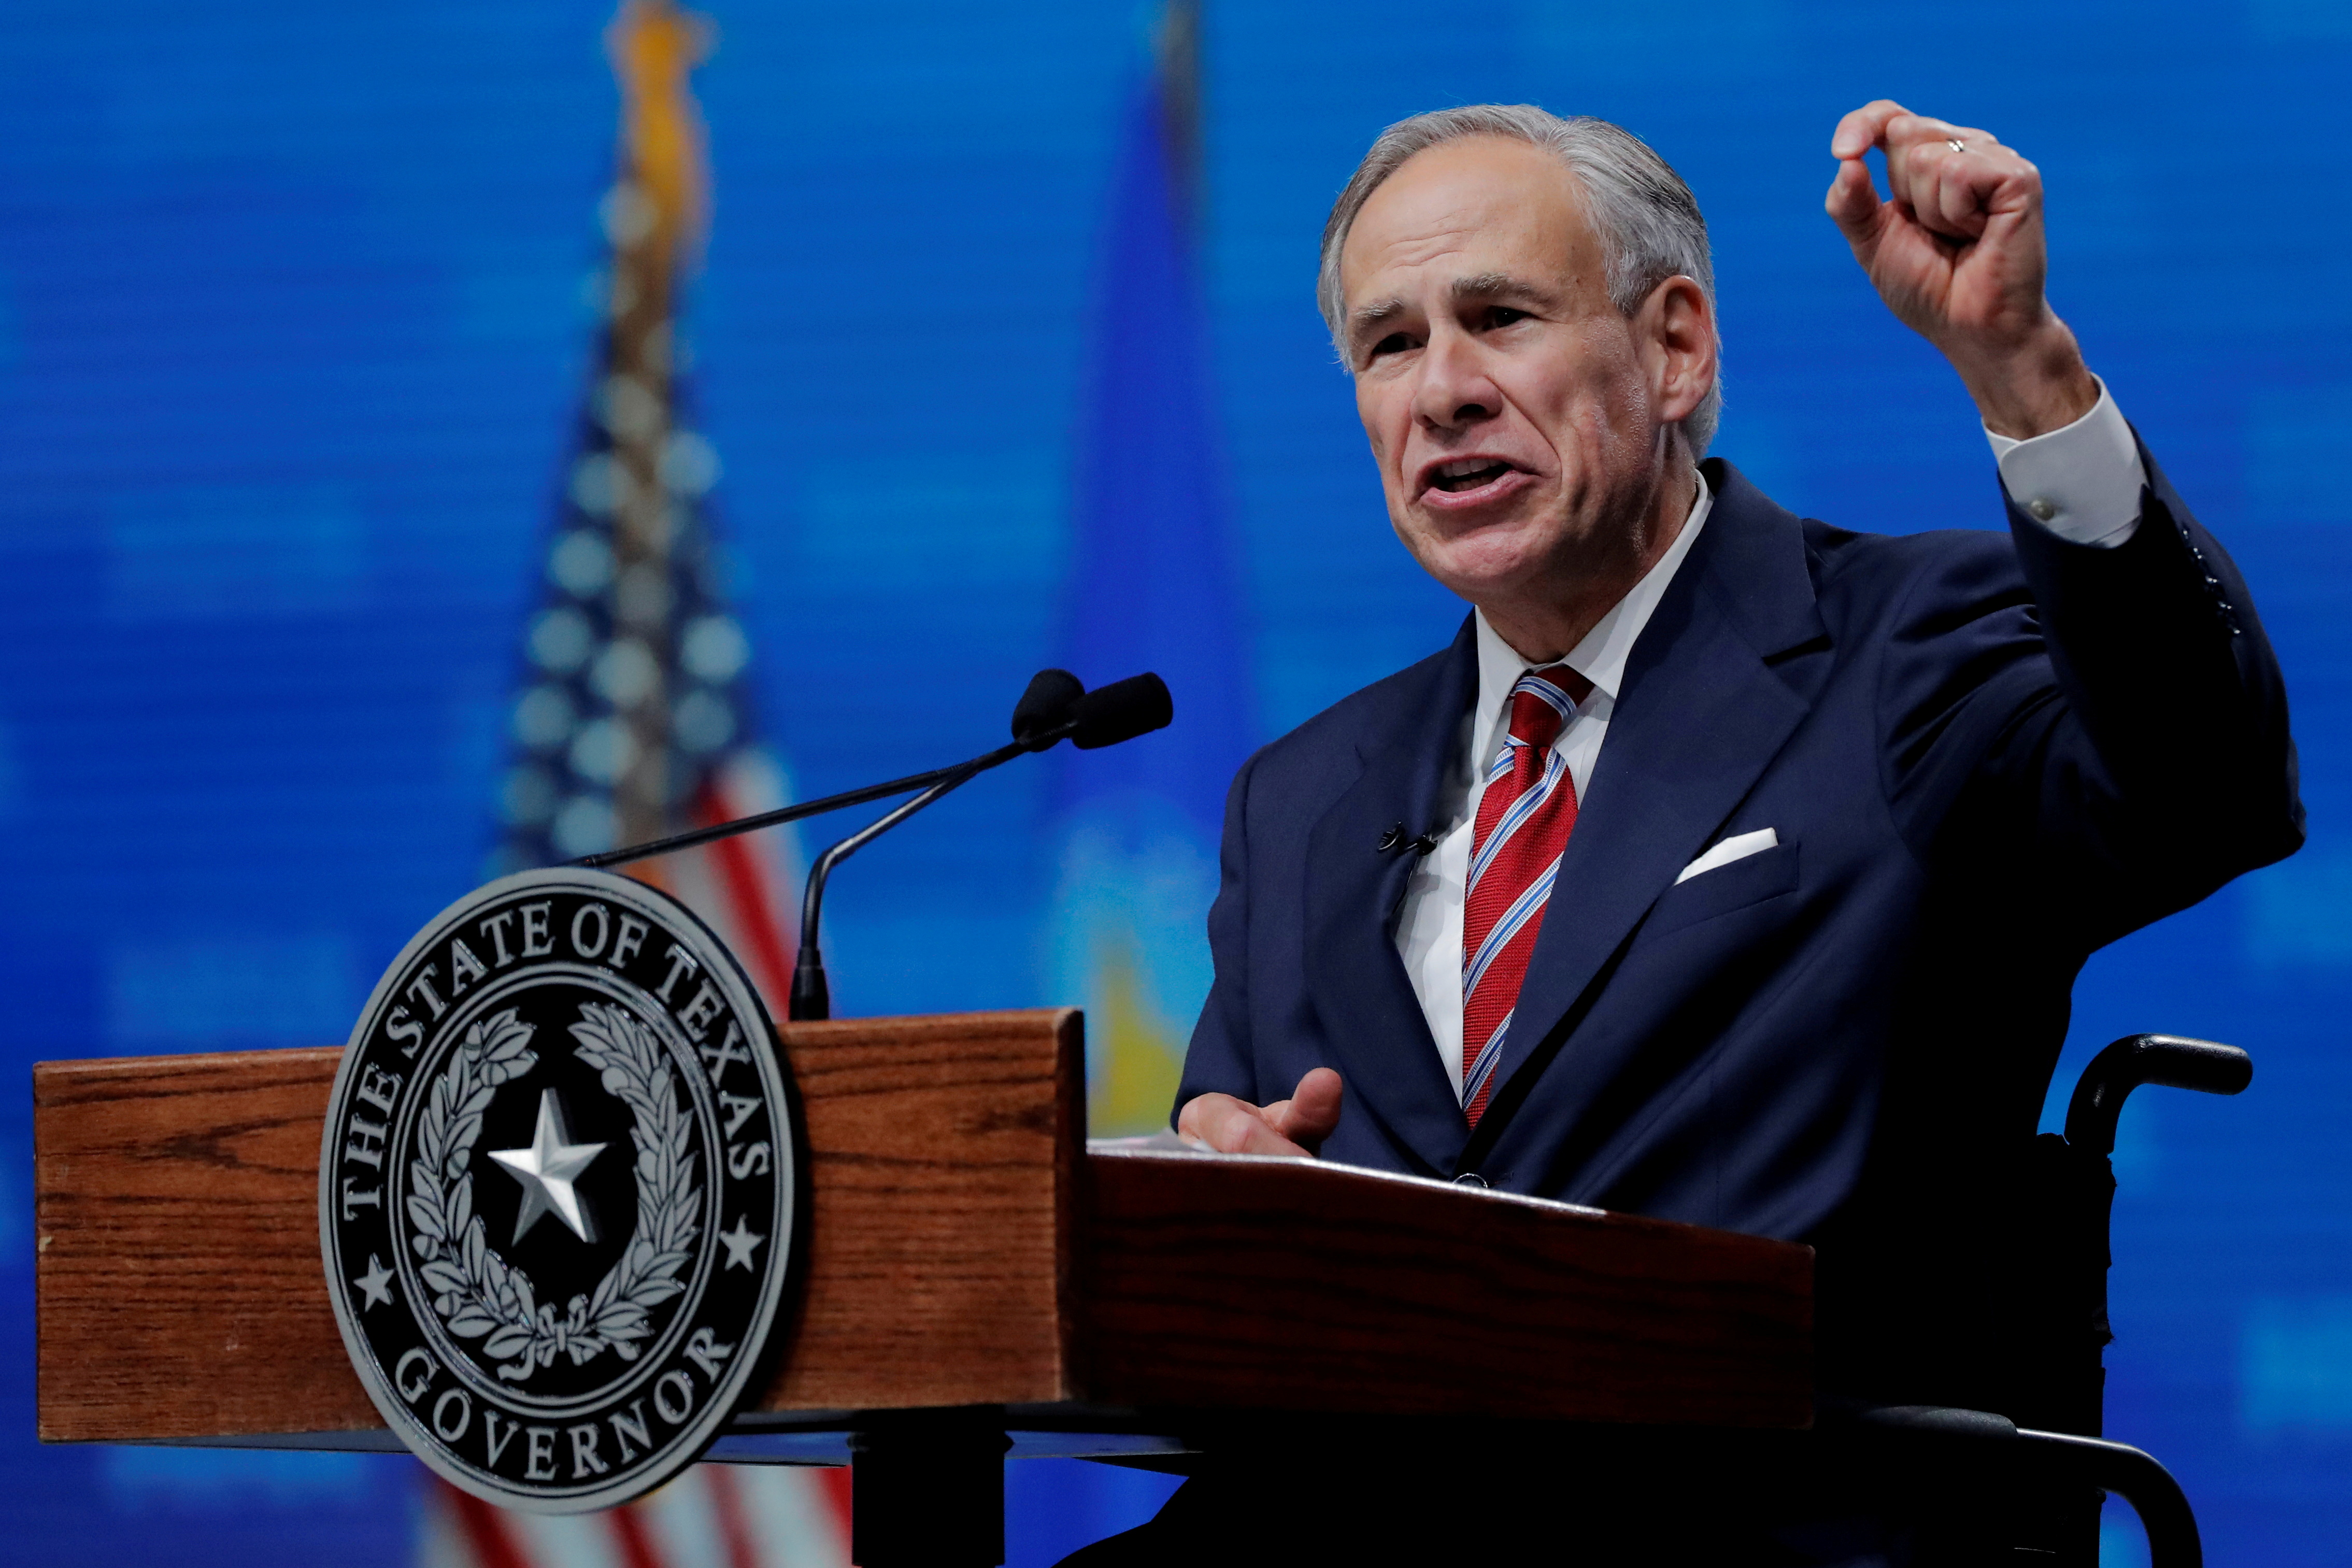 Texas Governor Greg Abbott speaks at the annual NRA convention in Dallas, Texas